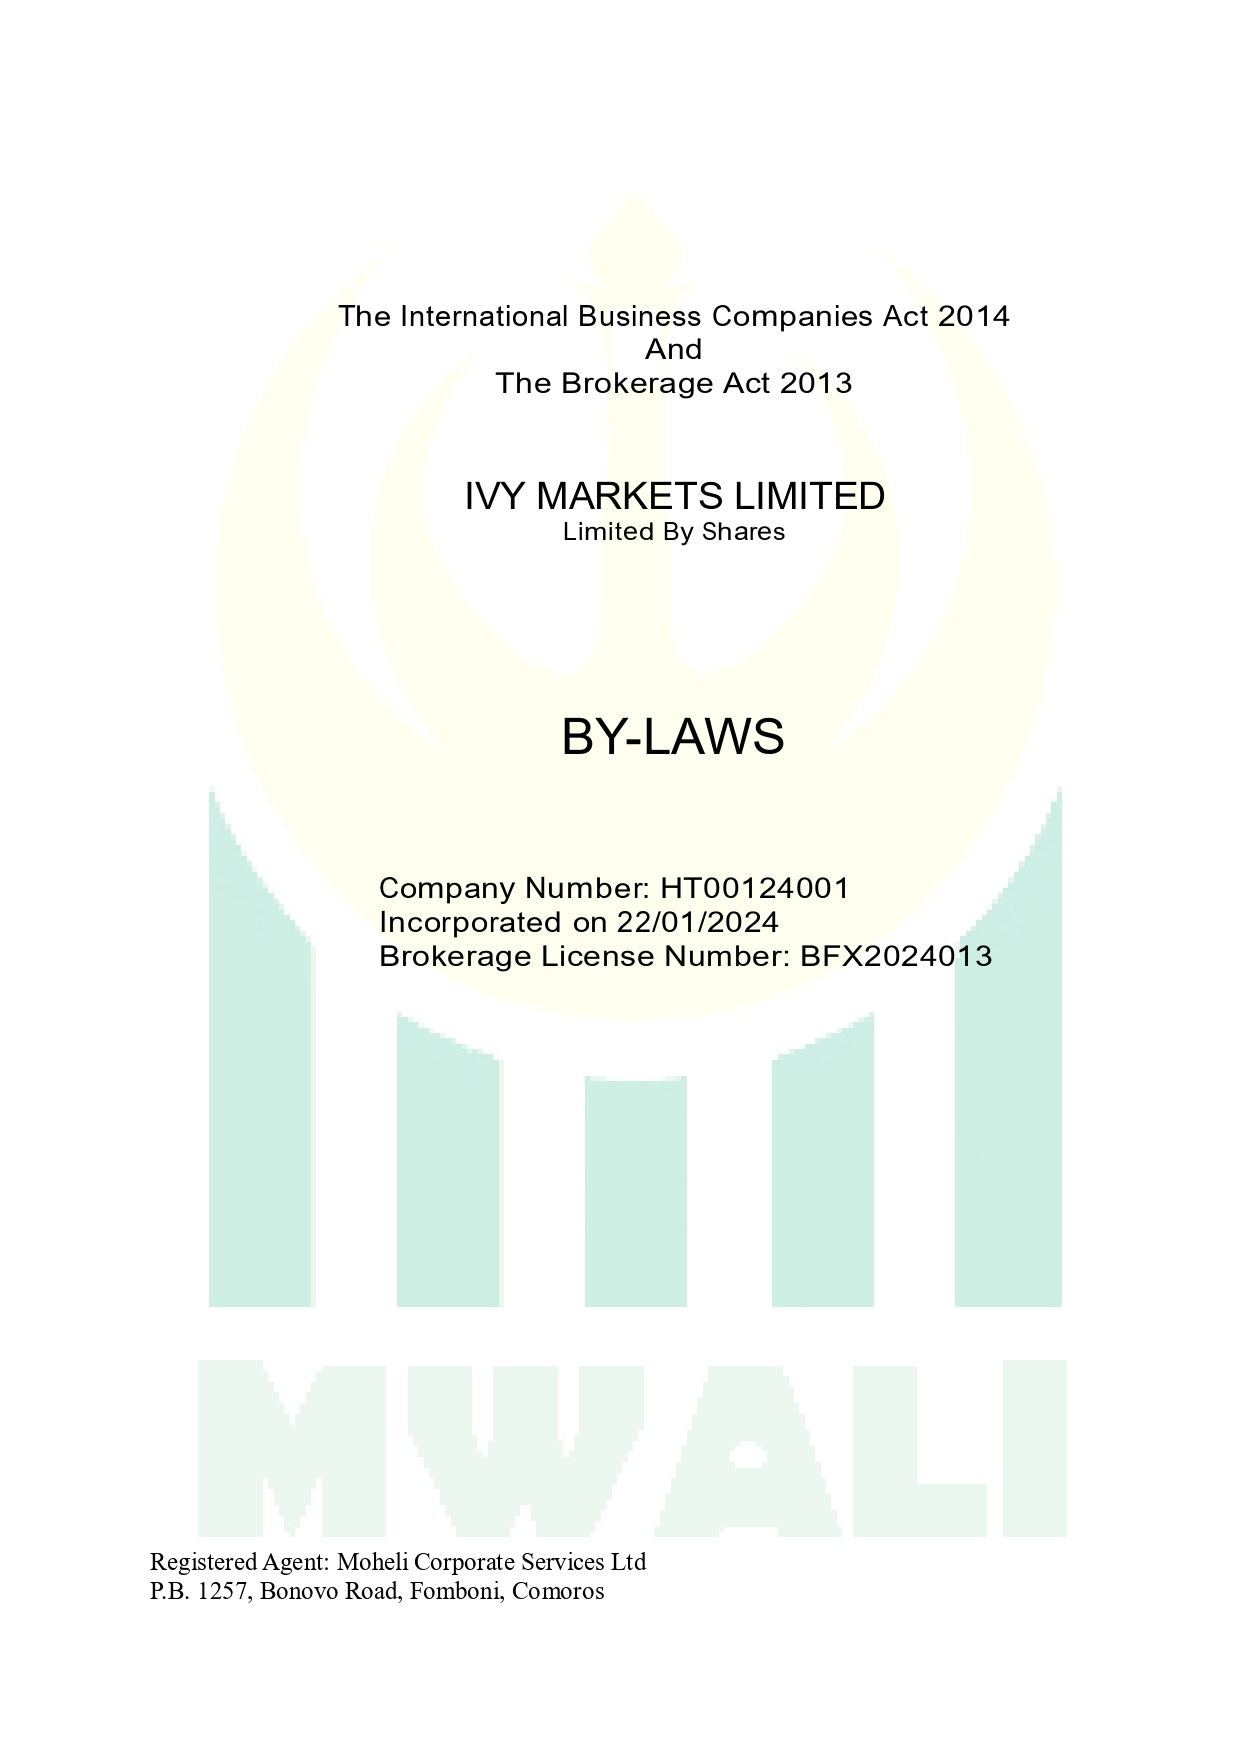 BYLAWS BrL IVY MARKETS LIMITED_page-0001